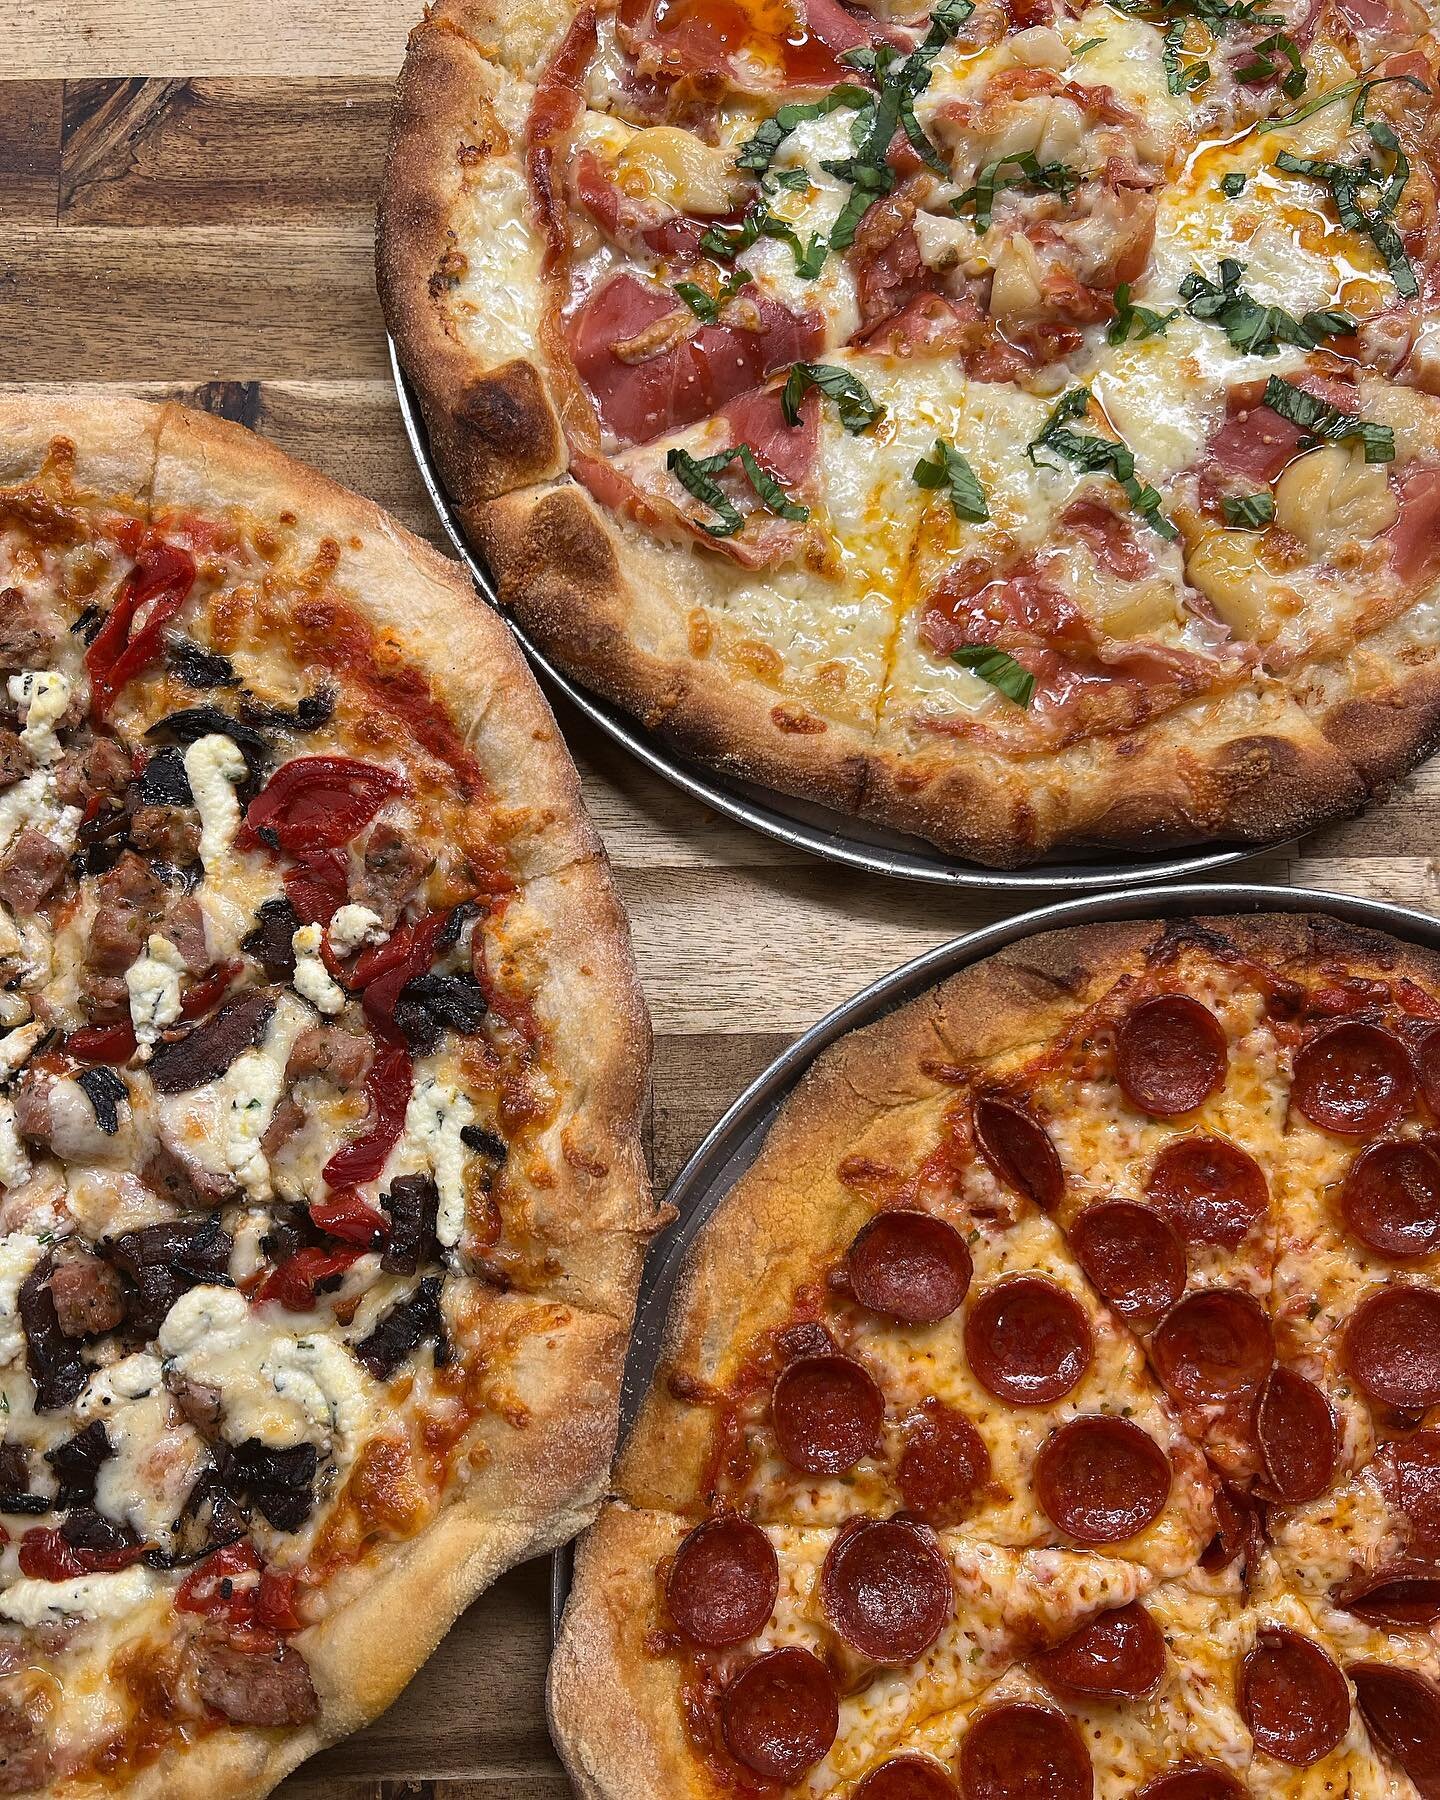 we make our dough 48hrs prior to every service, house-made sauce, house-made sausage, locally sourced ingredients from with in a 80 mile radius. can&rsquo;t get much better than that! come get come!

#dogandbeartavern #tahoma #california #smallplates